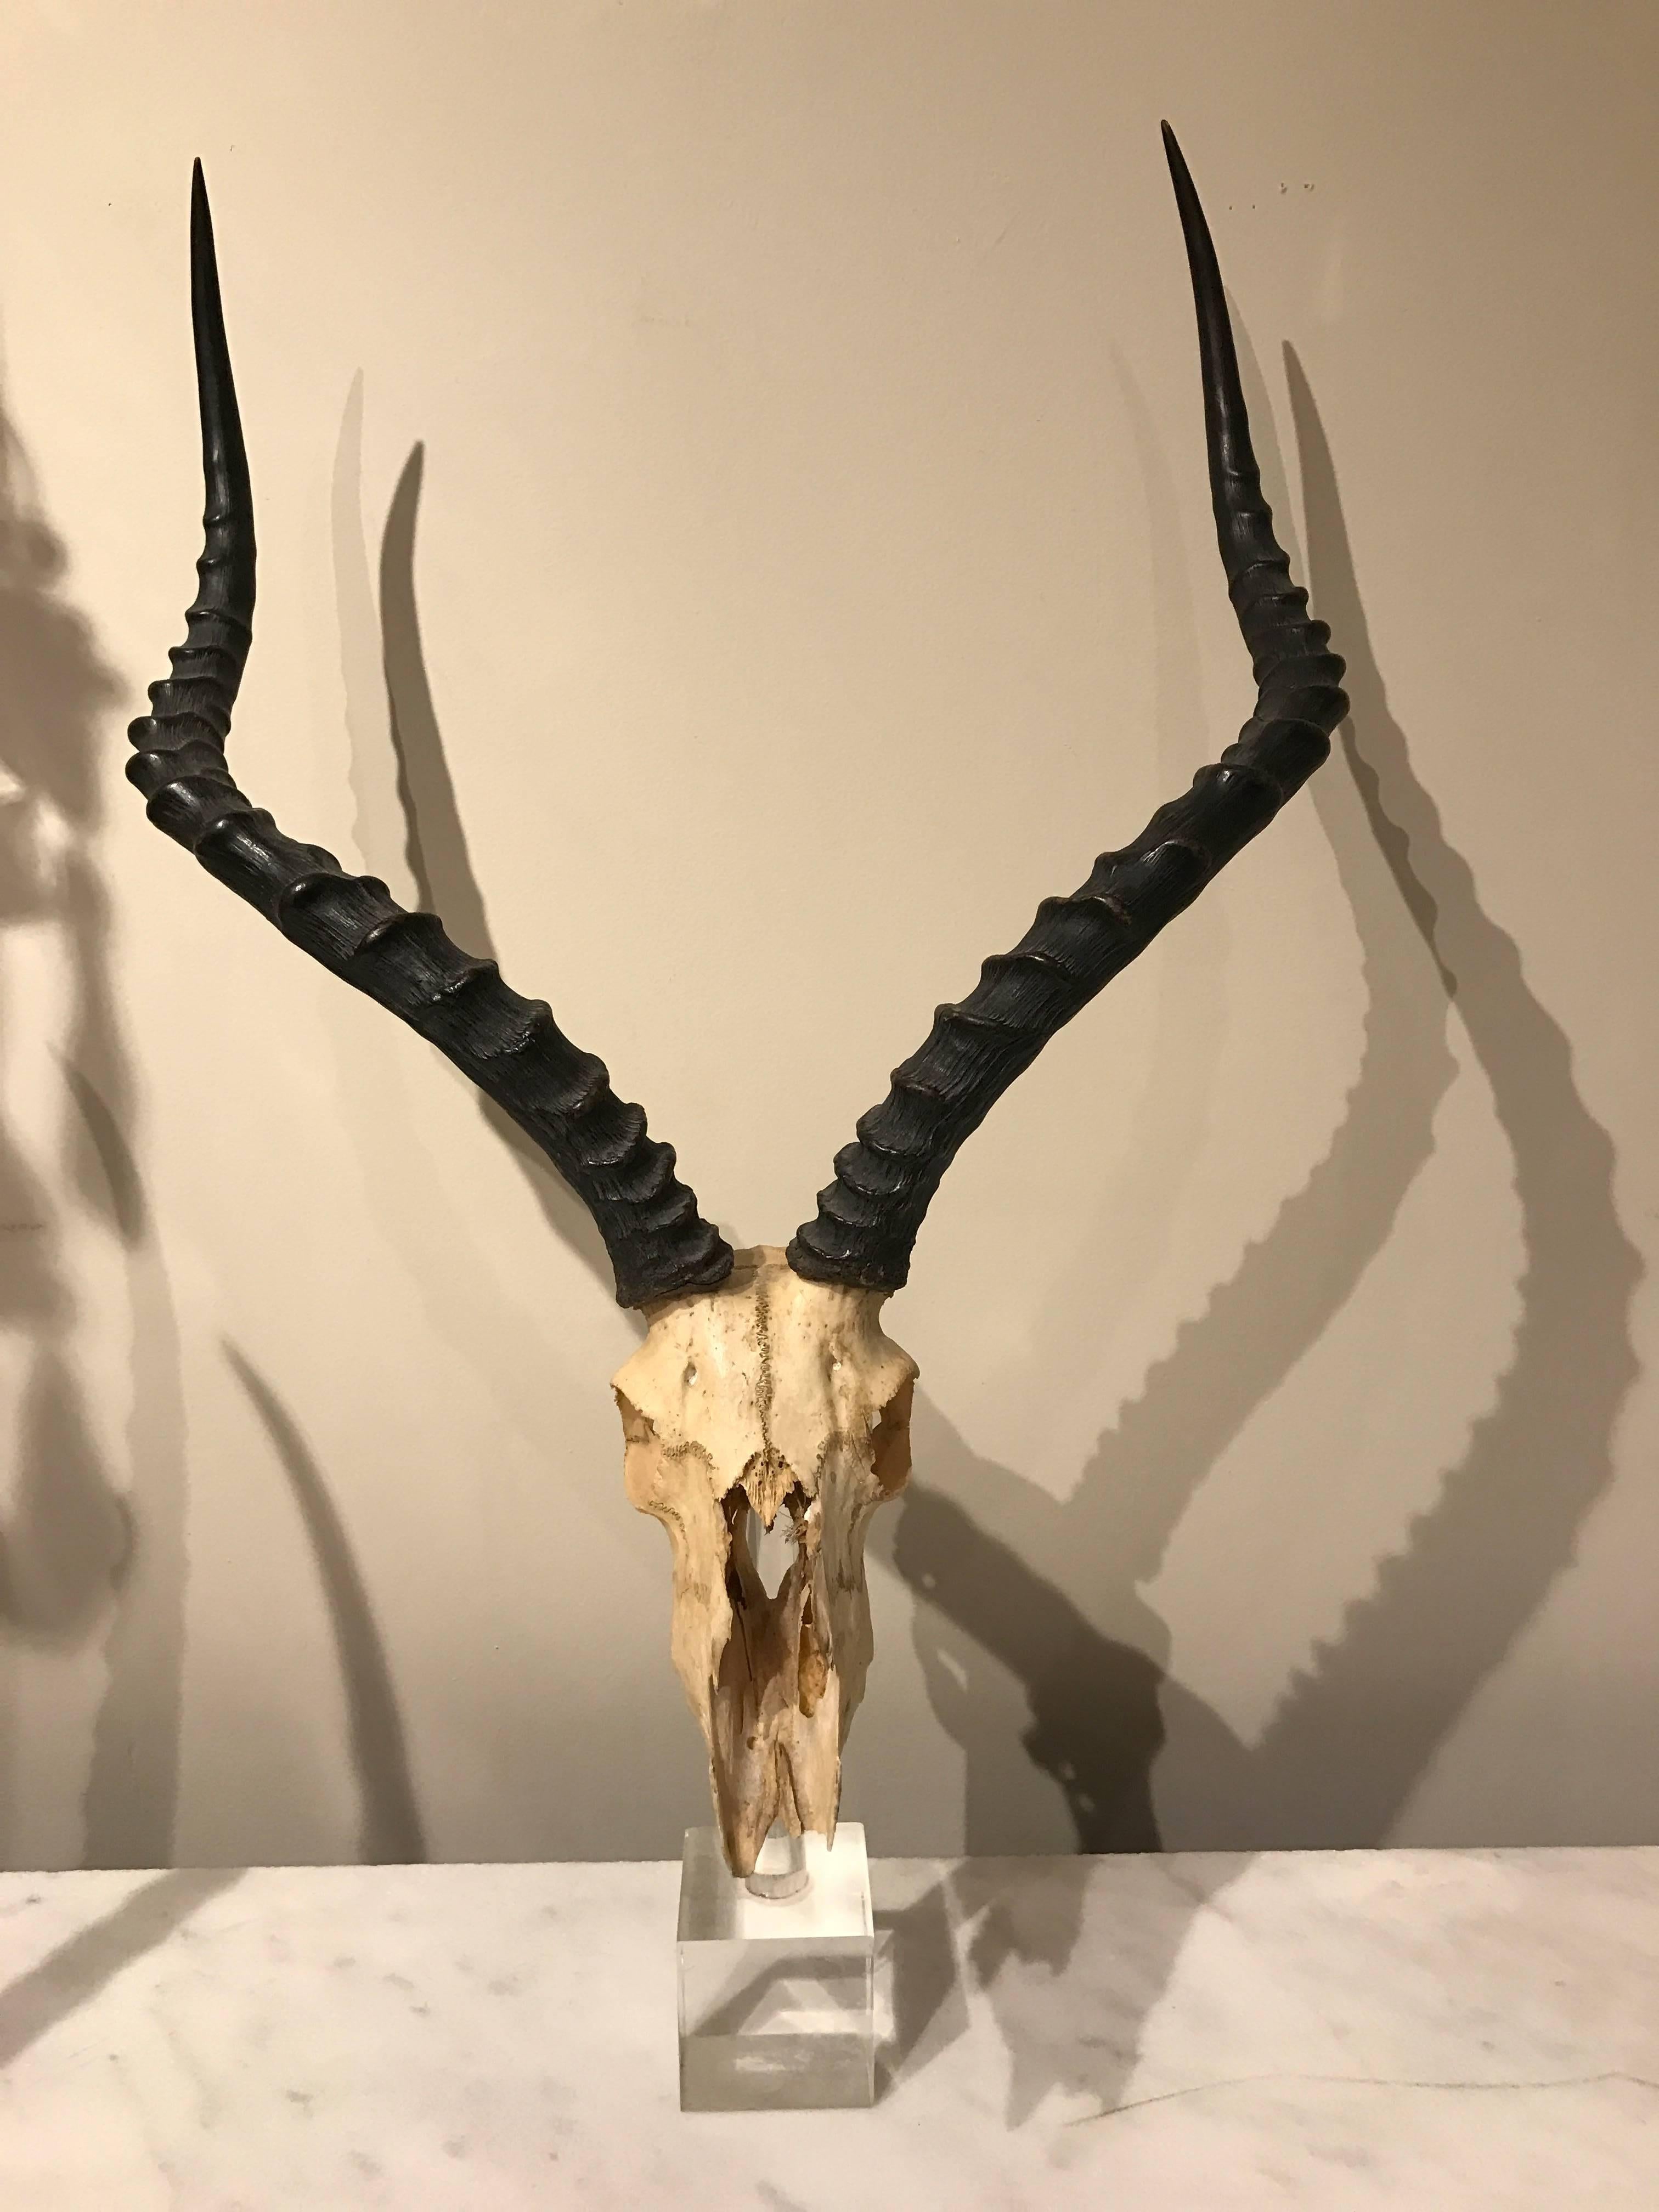 Large suite of three kudu / antelope museum mounted horns and skulls, each one of specimen quality, raised on a 3 inch square cube. Instant collection, sold as a set only.
Measures: 32